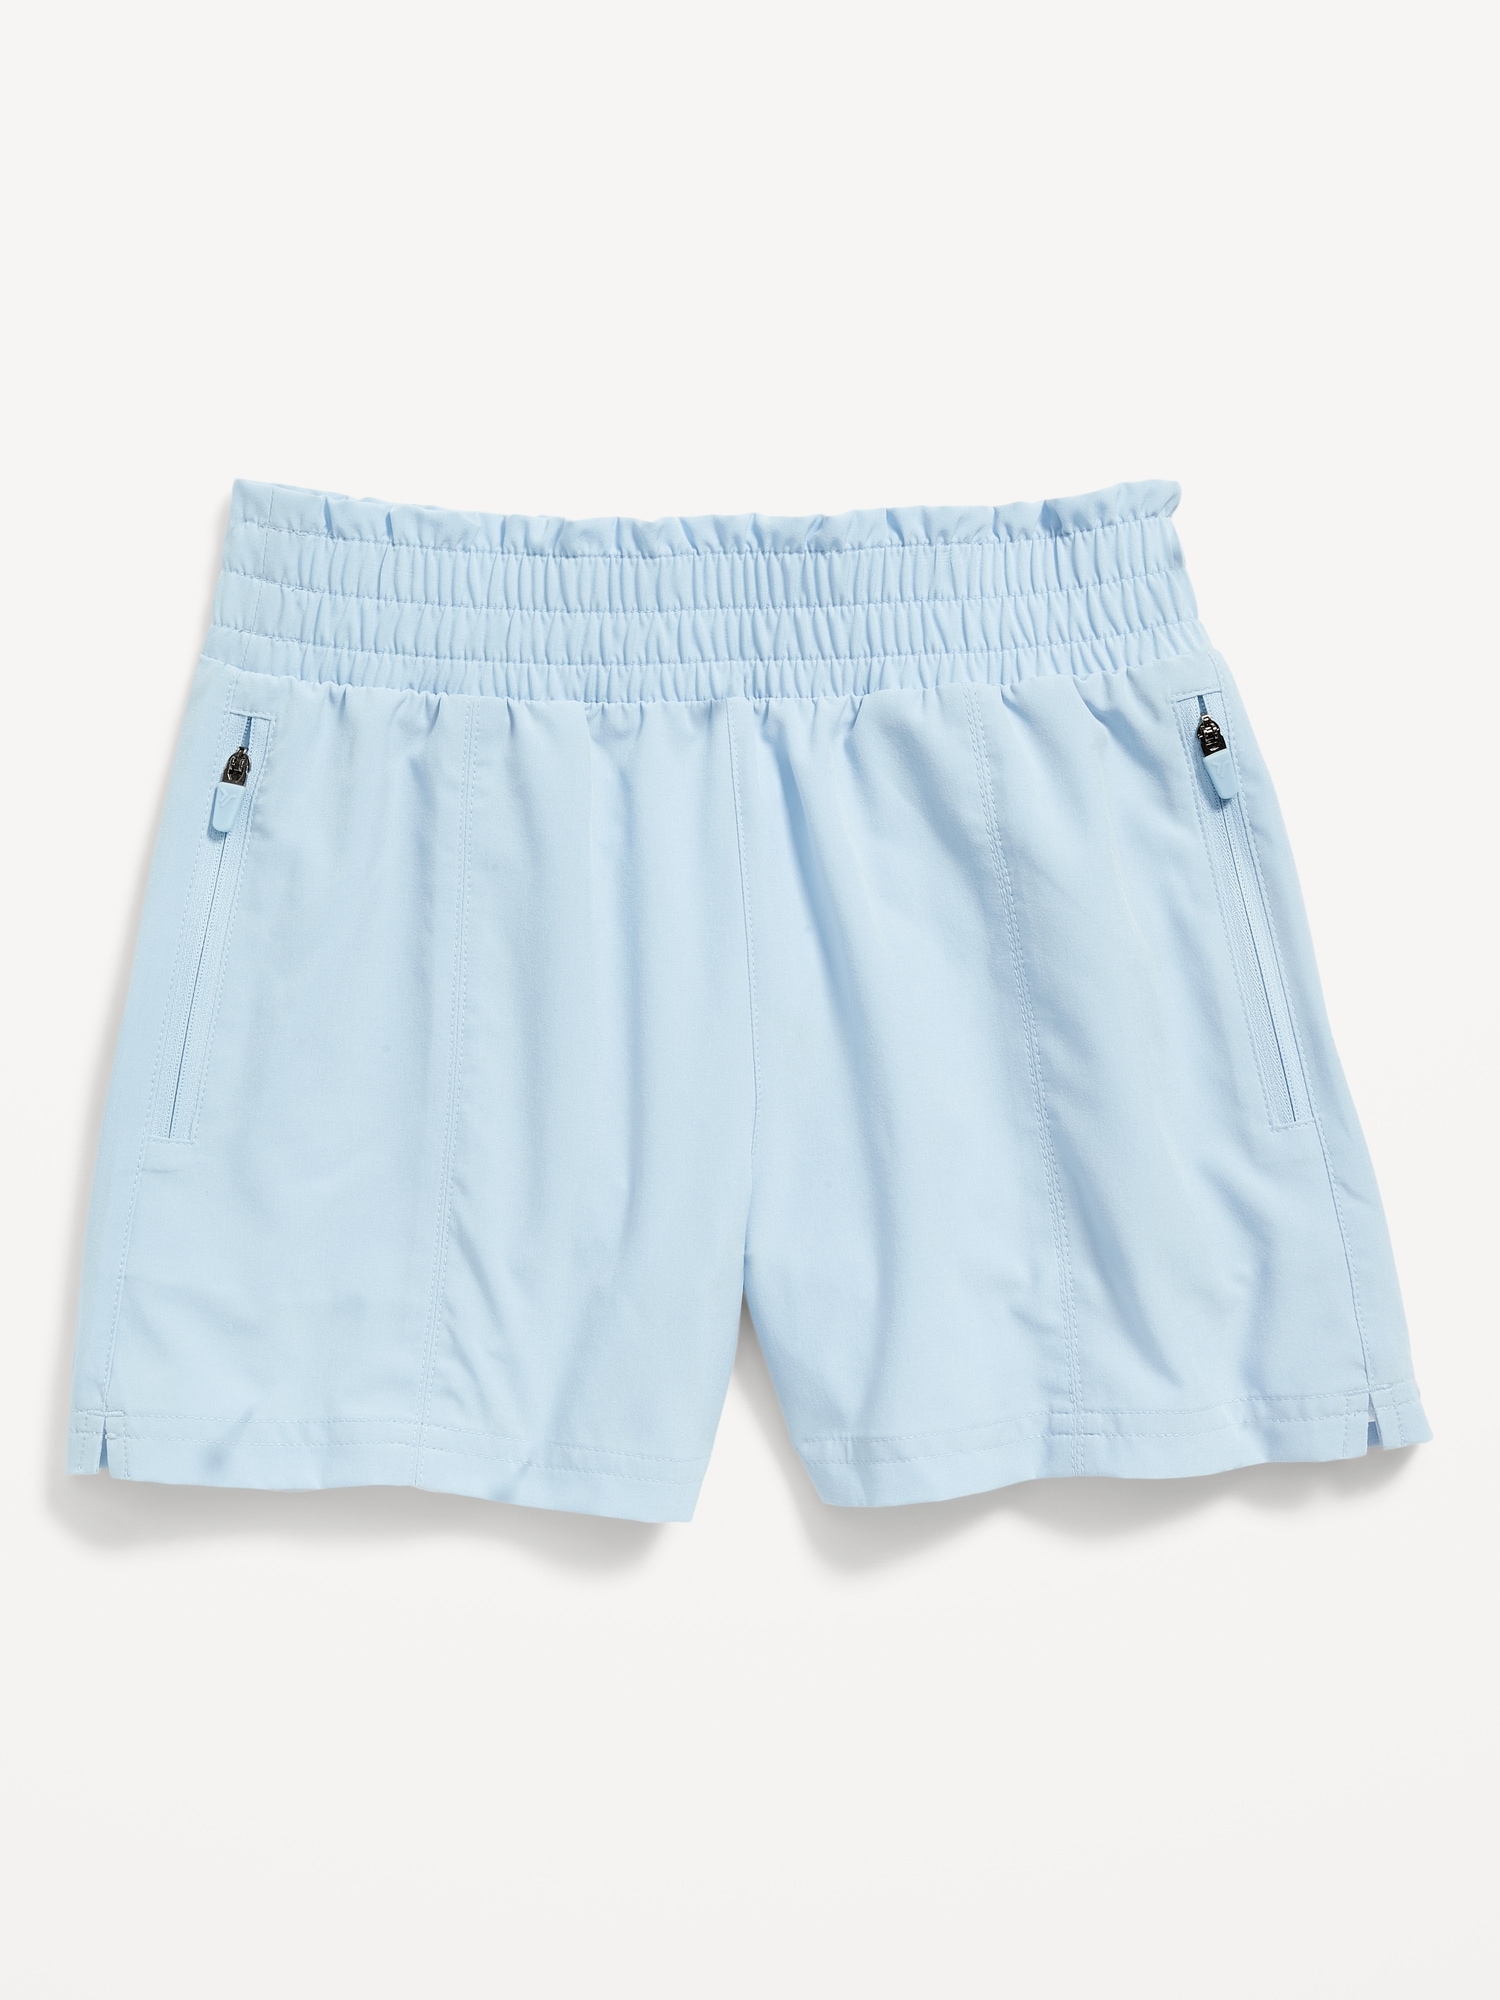 Old Navy High-Waisted StretchTech Zip-Pocket Shorts for Girls